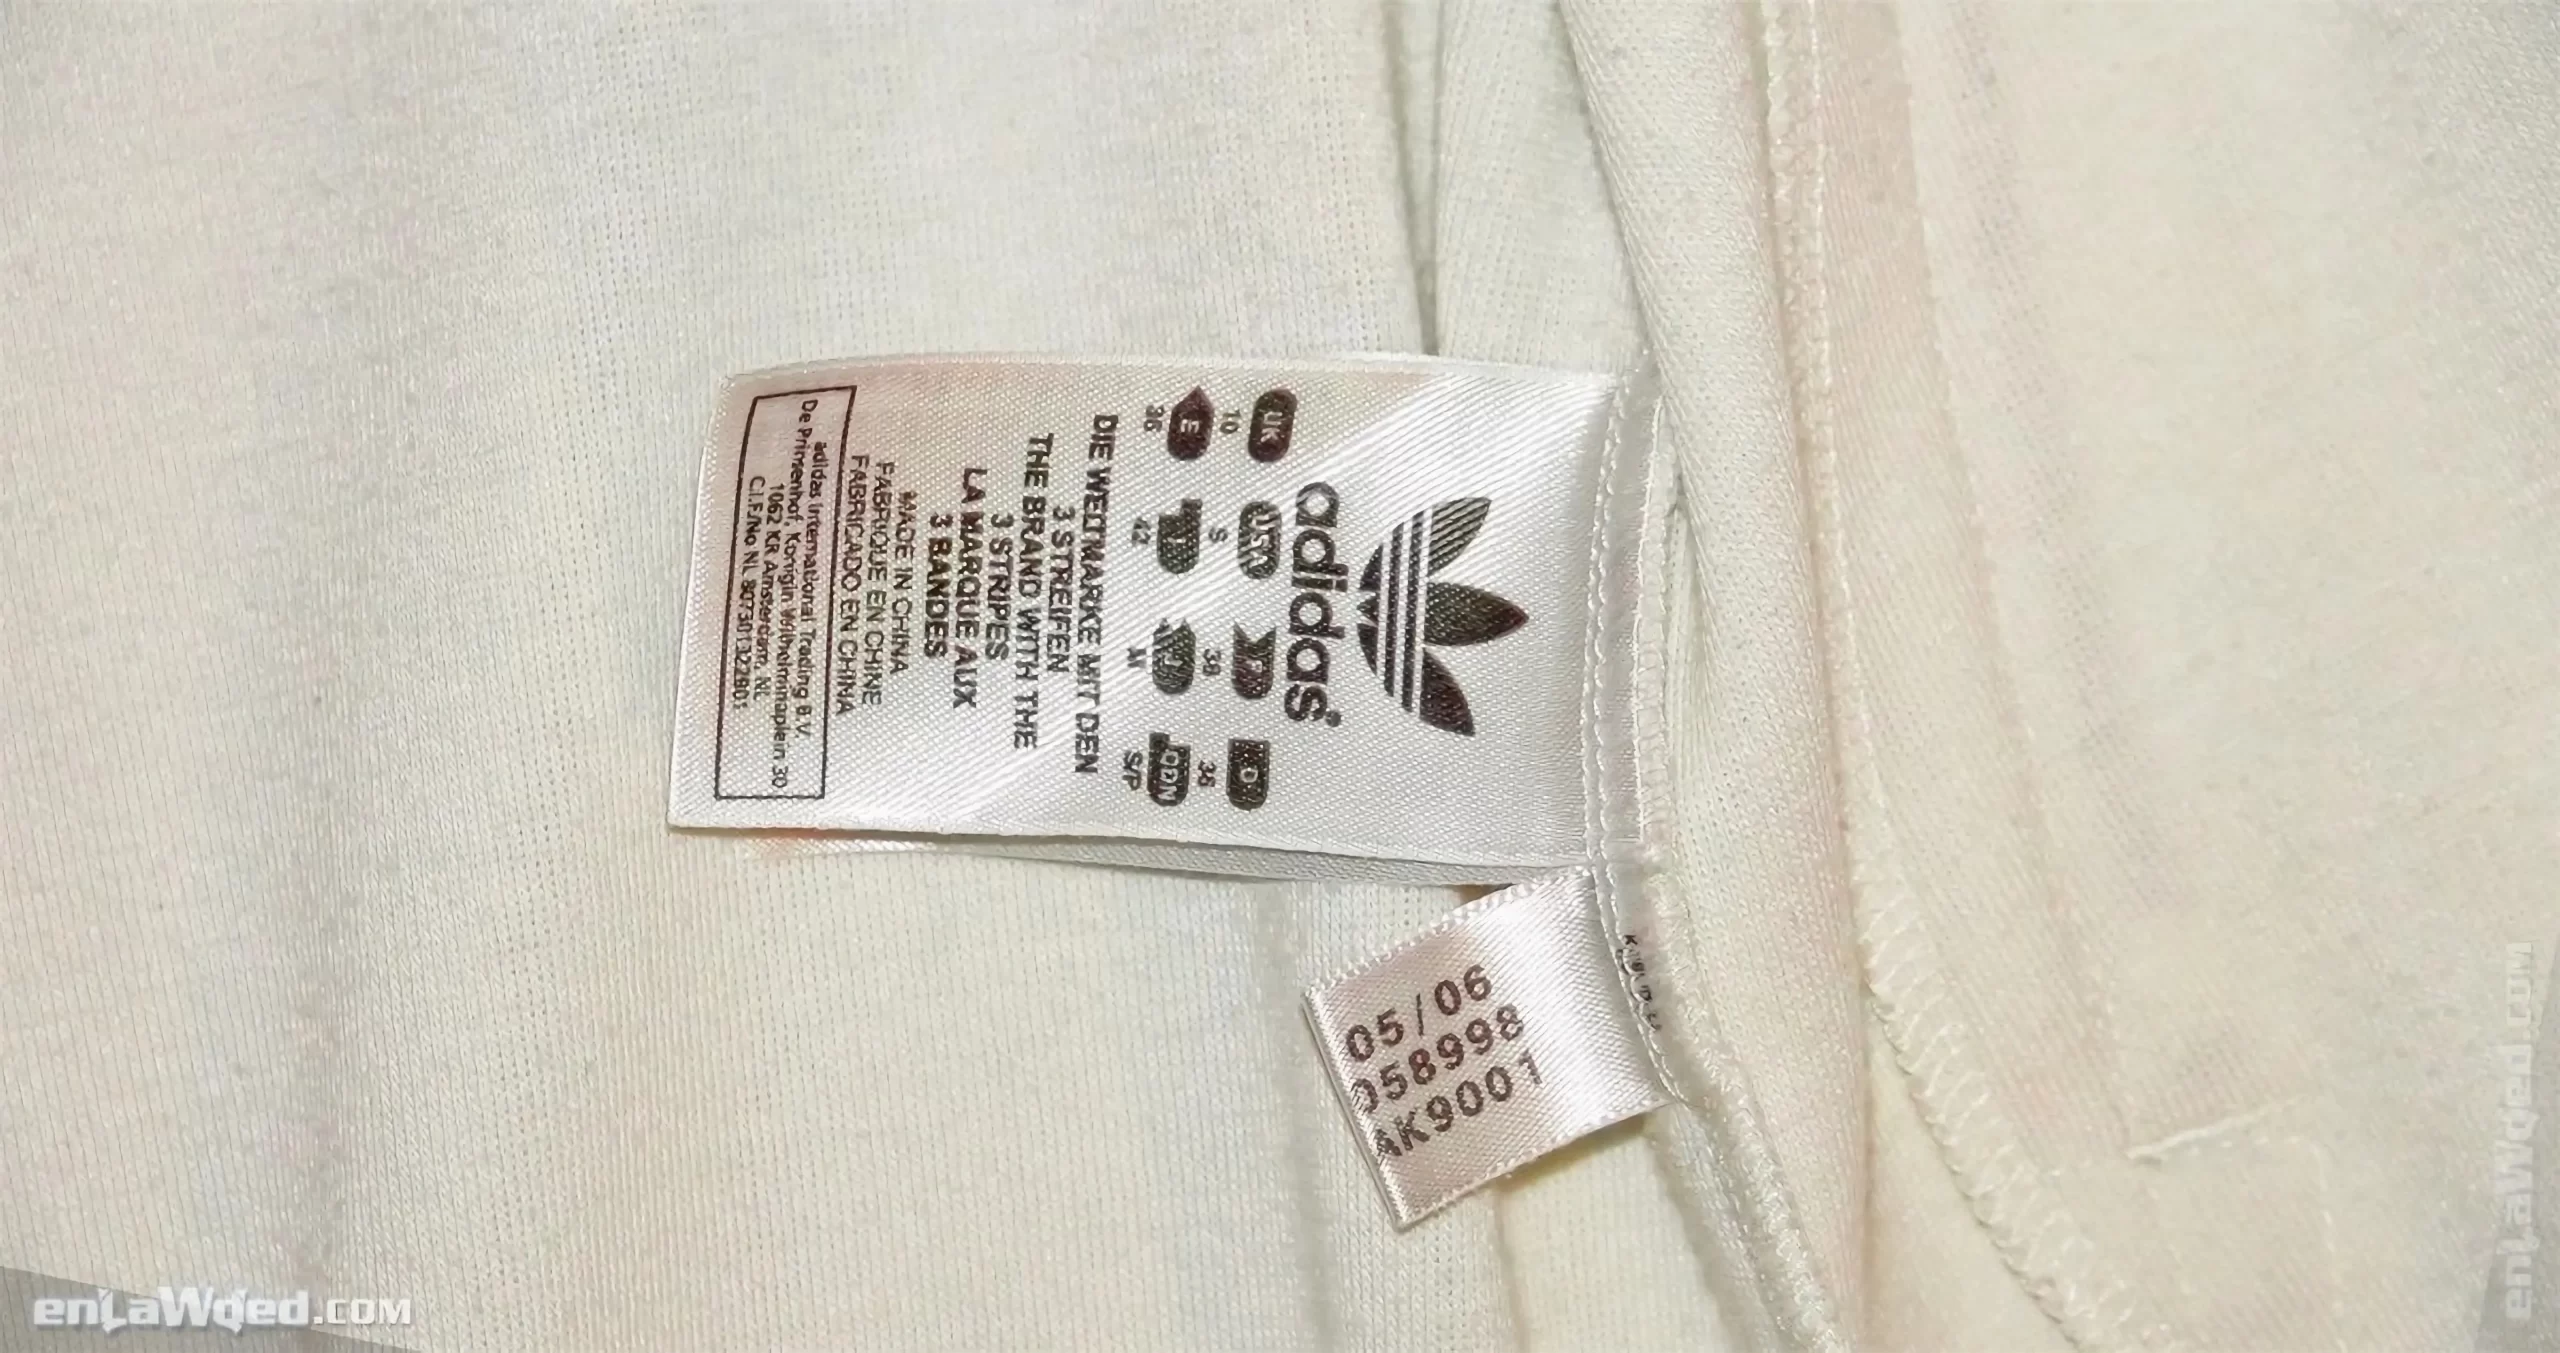 Adidas tag of the Milano jacket, with the month and year of fabrication: 05/2006